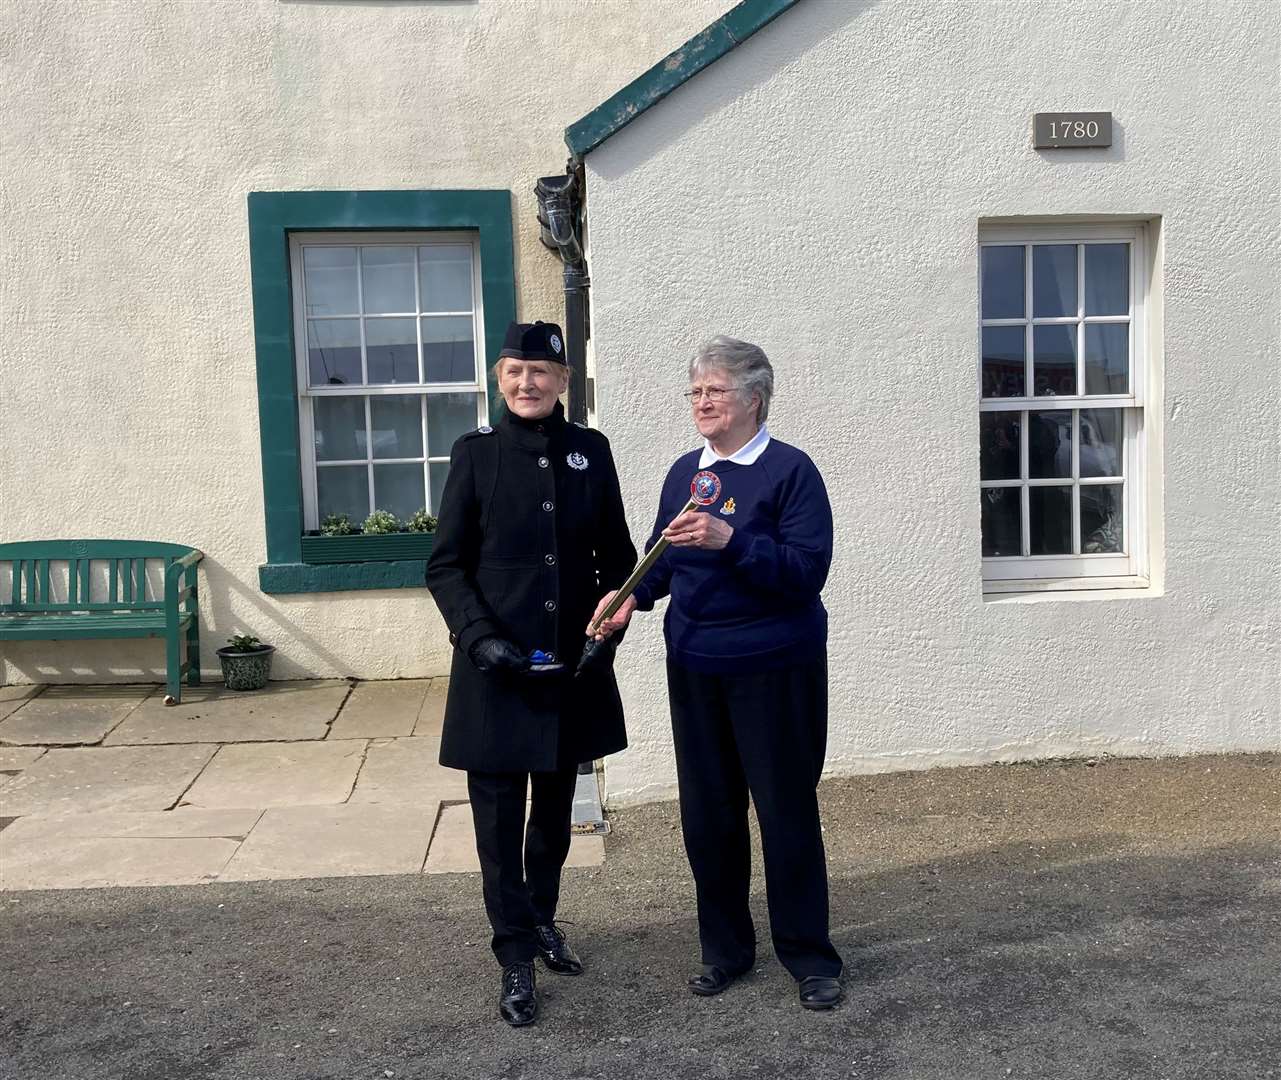 The baton is handed over to Esther Slater, Orkney Battalion Boys’ Brigade, by Johanna Geddes of 1st Thurso at Pennyland House.